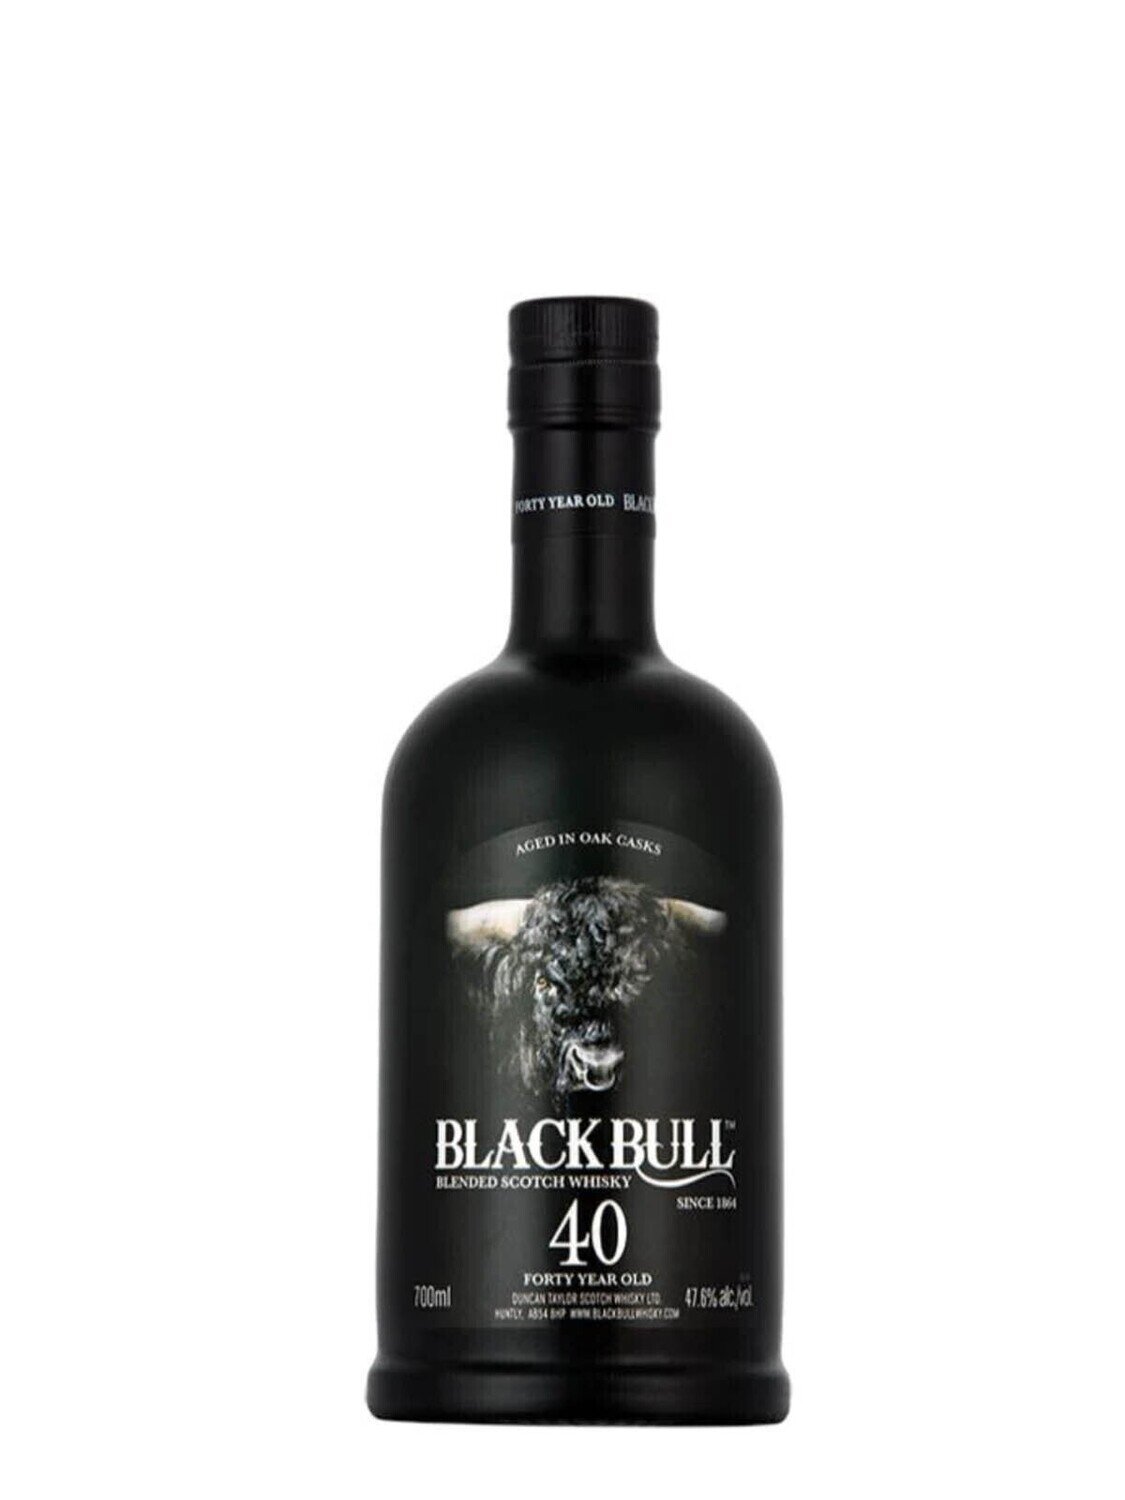 Black Bull 40 Year Old Blended Scotch Whisky (7th Release) 47.6% ABV 750mL